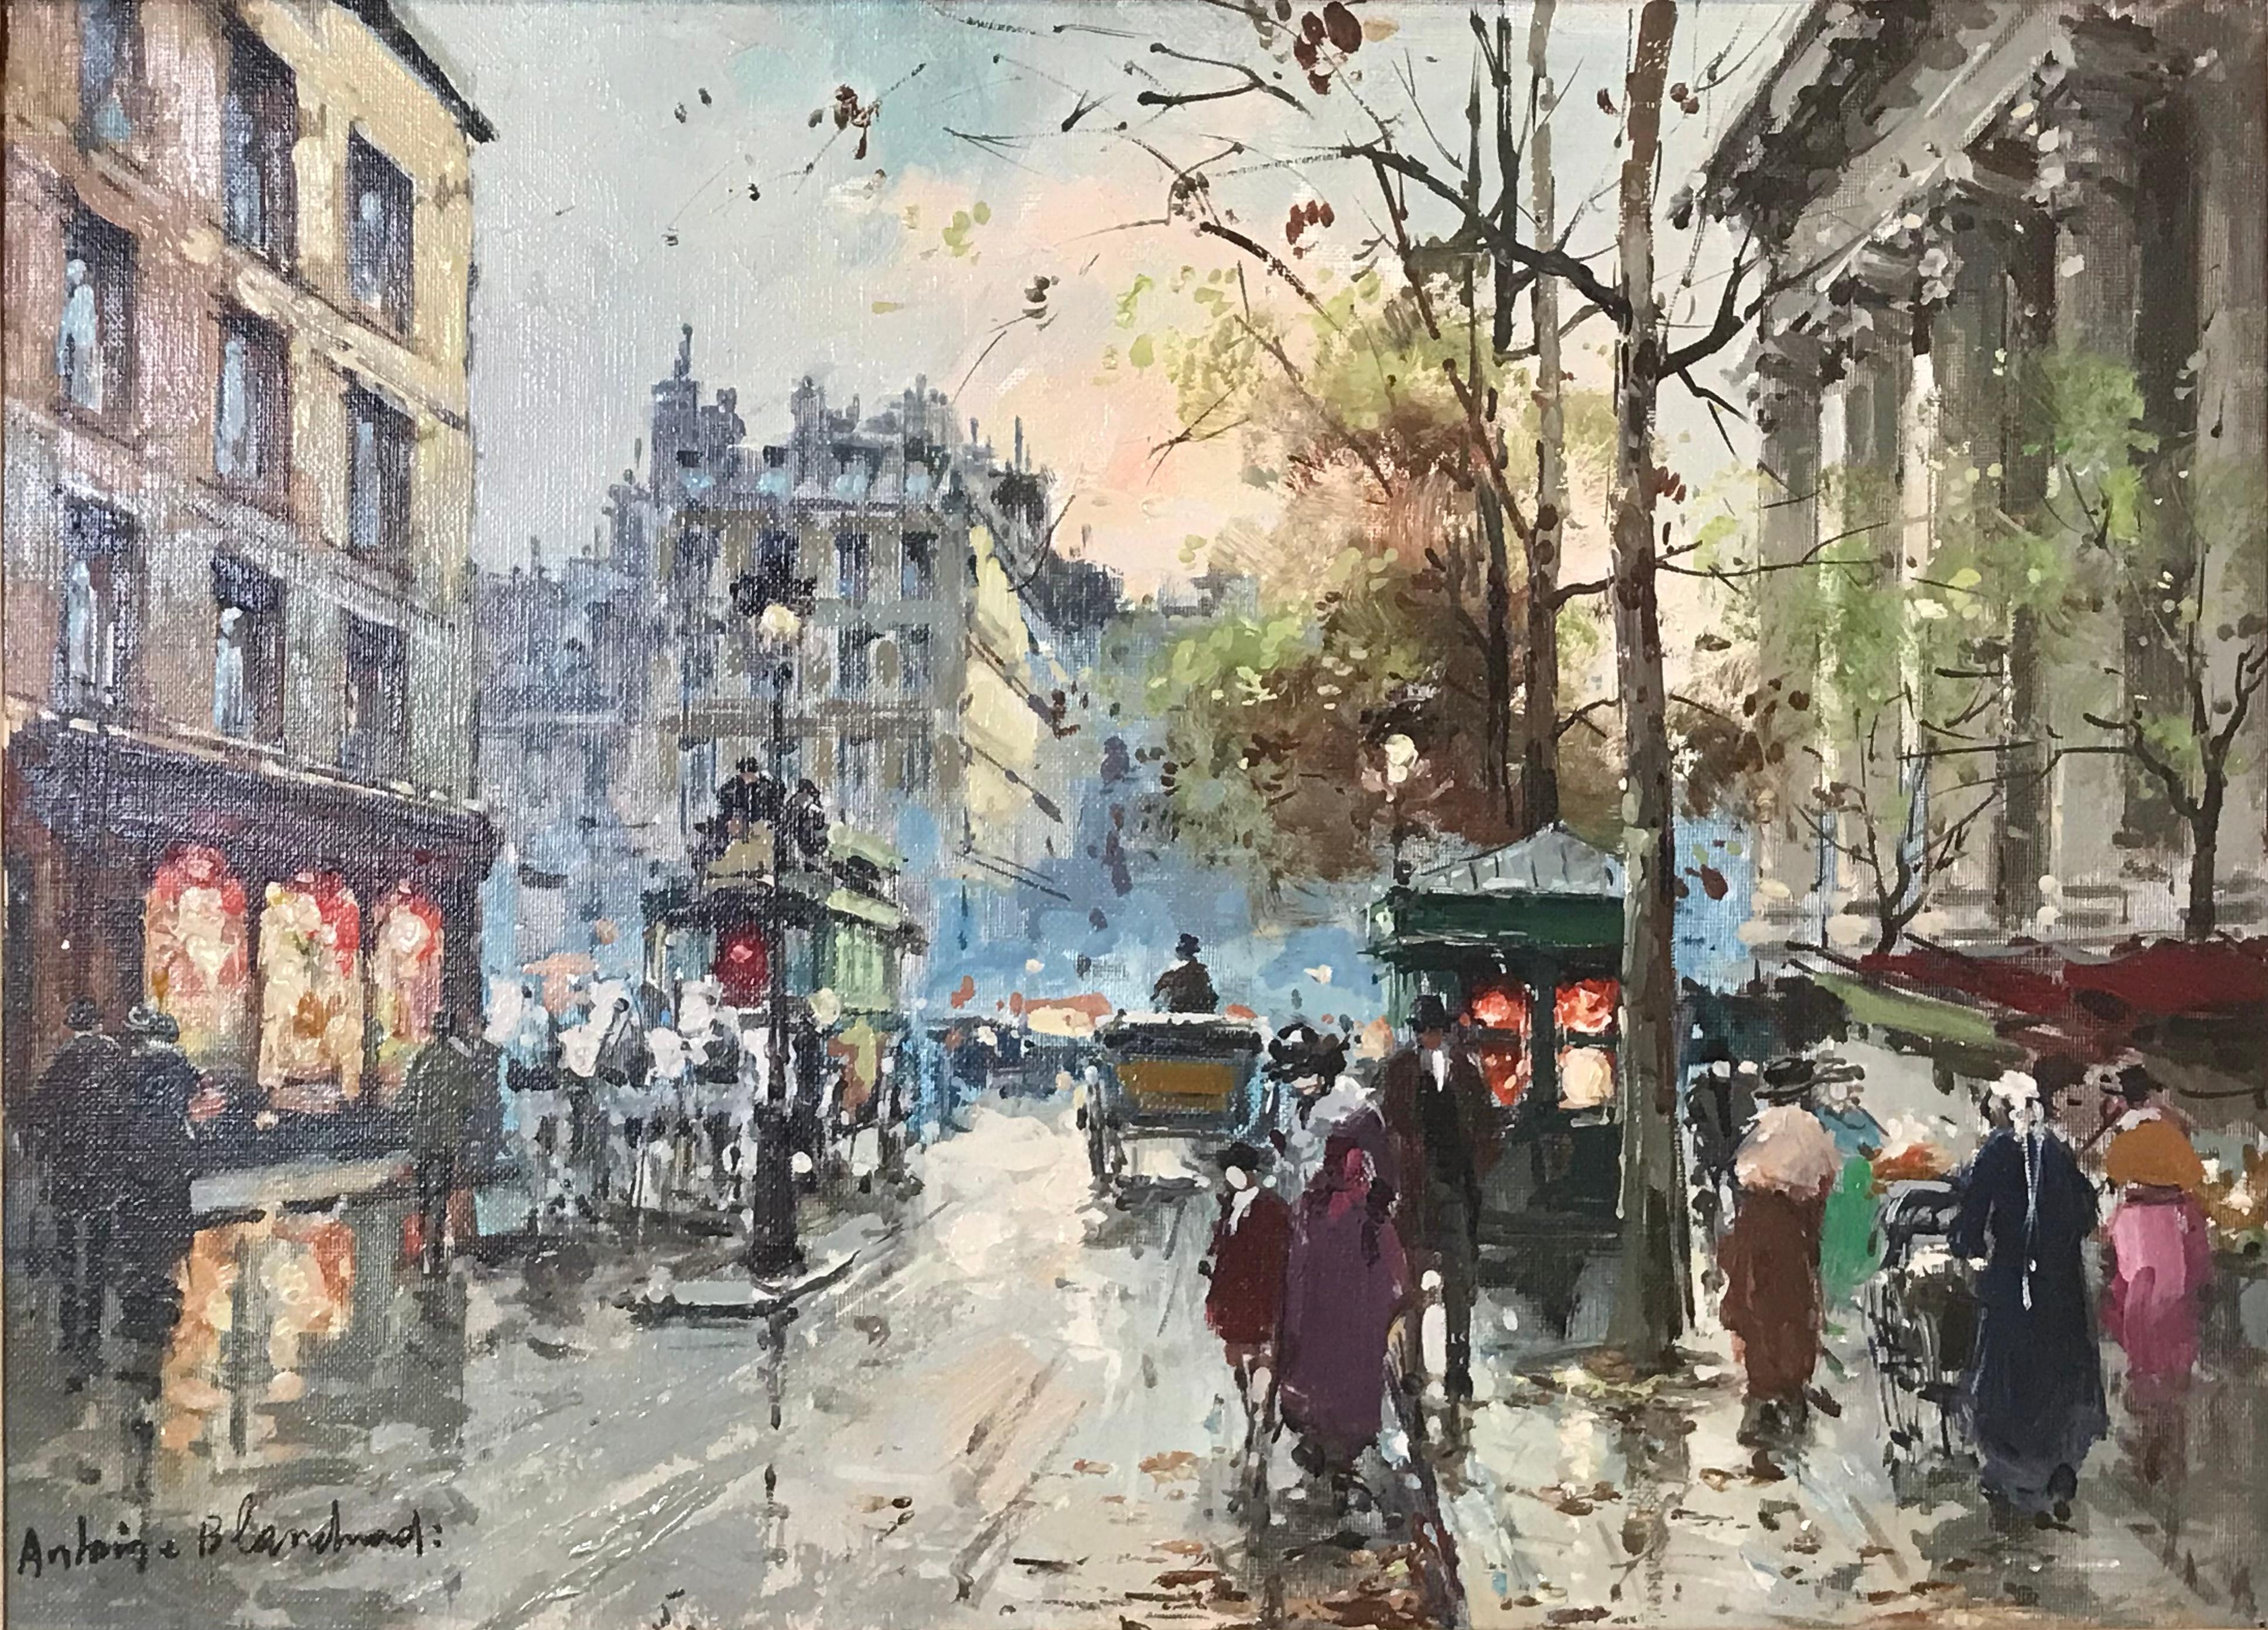 Antoine Blanchard (1910 - 1988) Boulevard Des Capucines, Place De La Madeleine. A wonderful and vibrant scene from the Grand Boulevards of Paris under the rain in fall. You can hear the horses prancing and carriages on the cobblestone streets. You